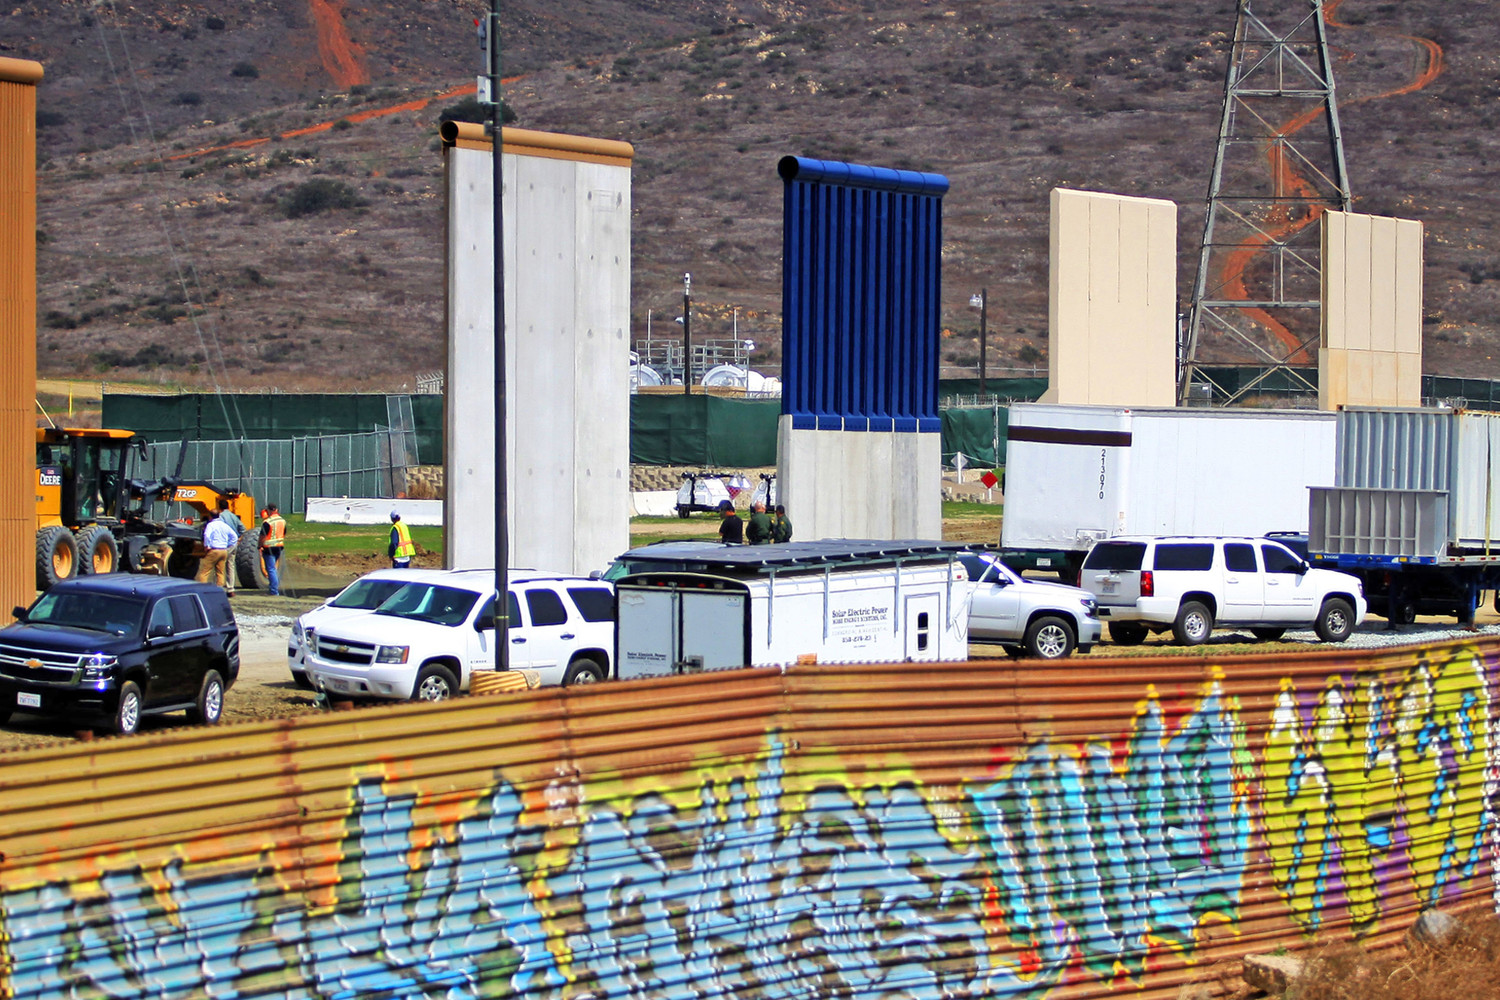 Border wall prototypes are seen near San Diego March 12. Image taken from Las Torres, Mexico.